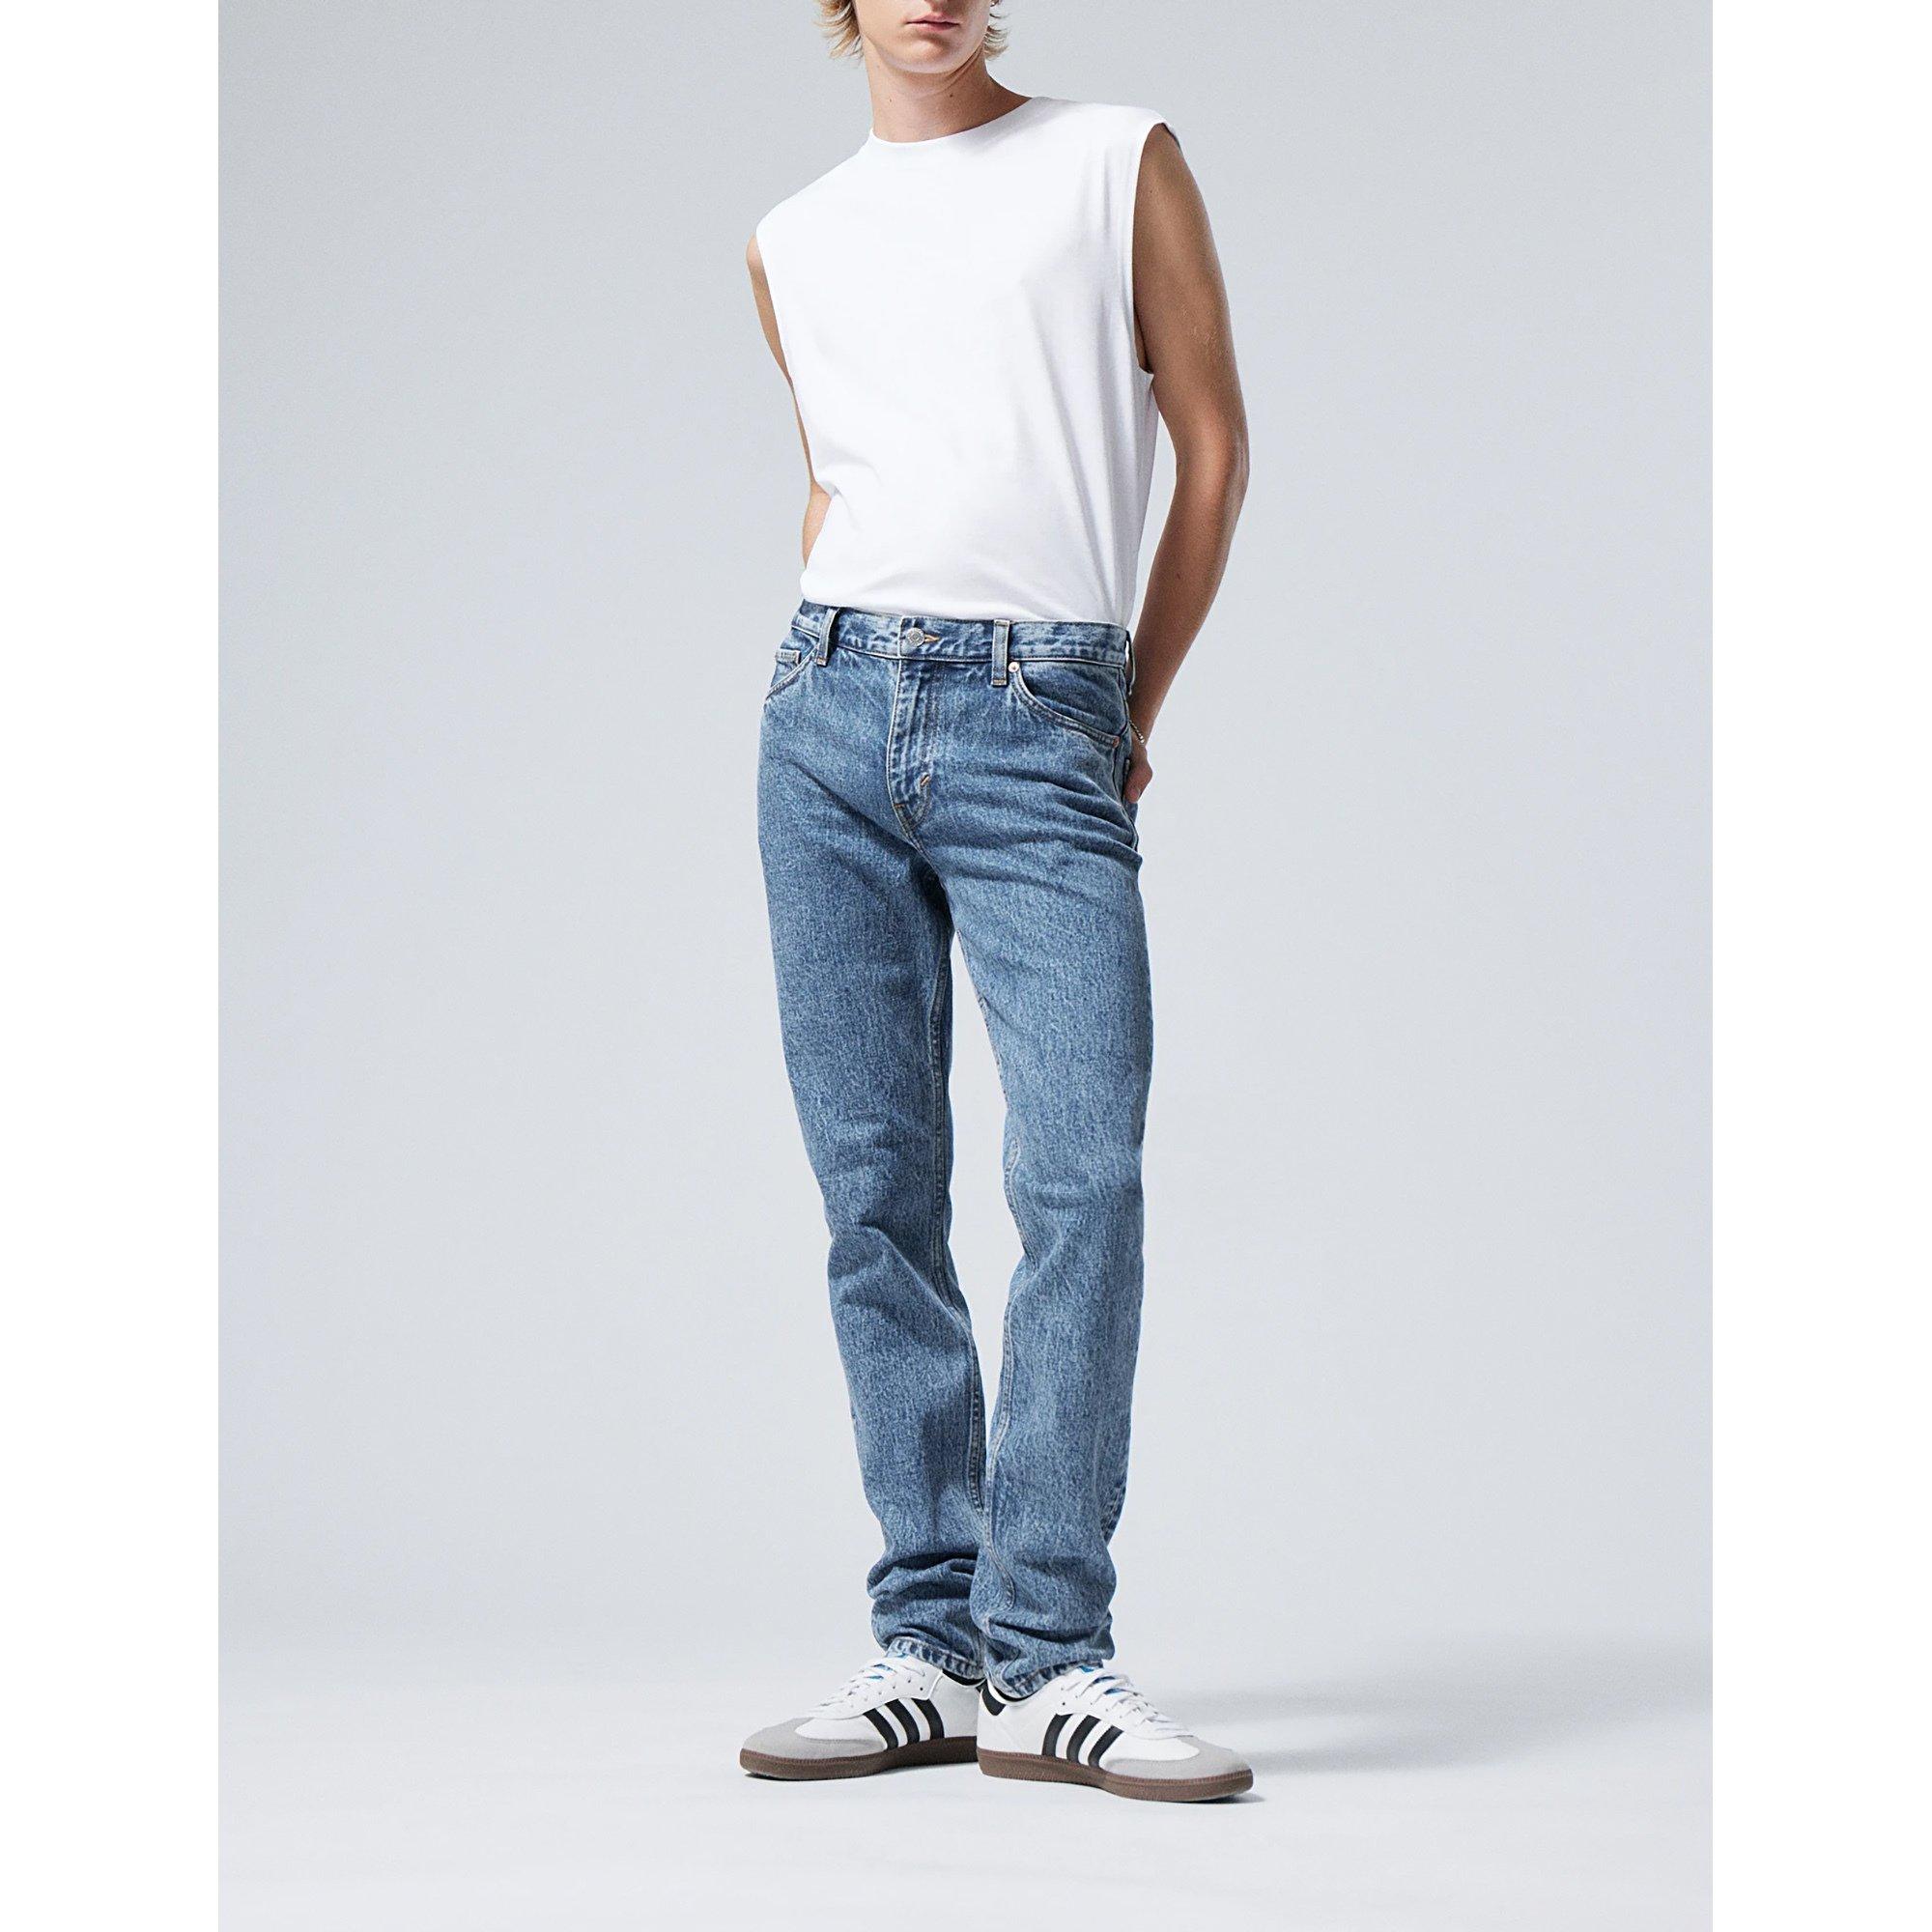 WEEKDAY Sunday Slim Tapered Jeans Jeans, Tapered Slim Fit 